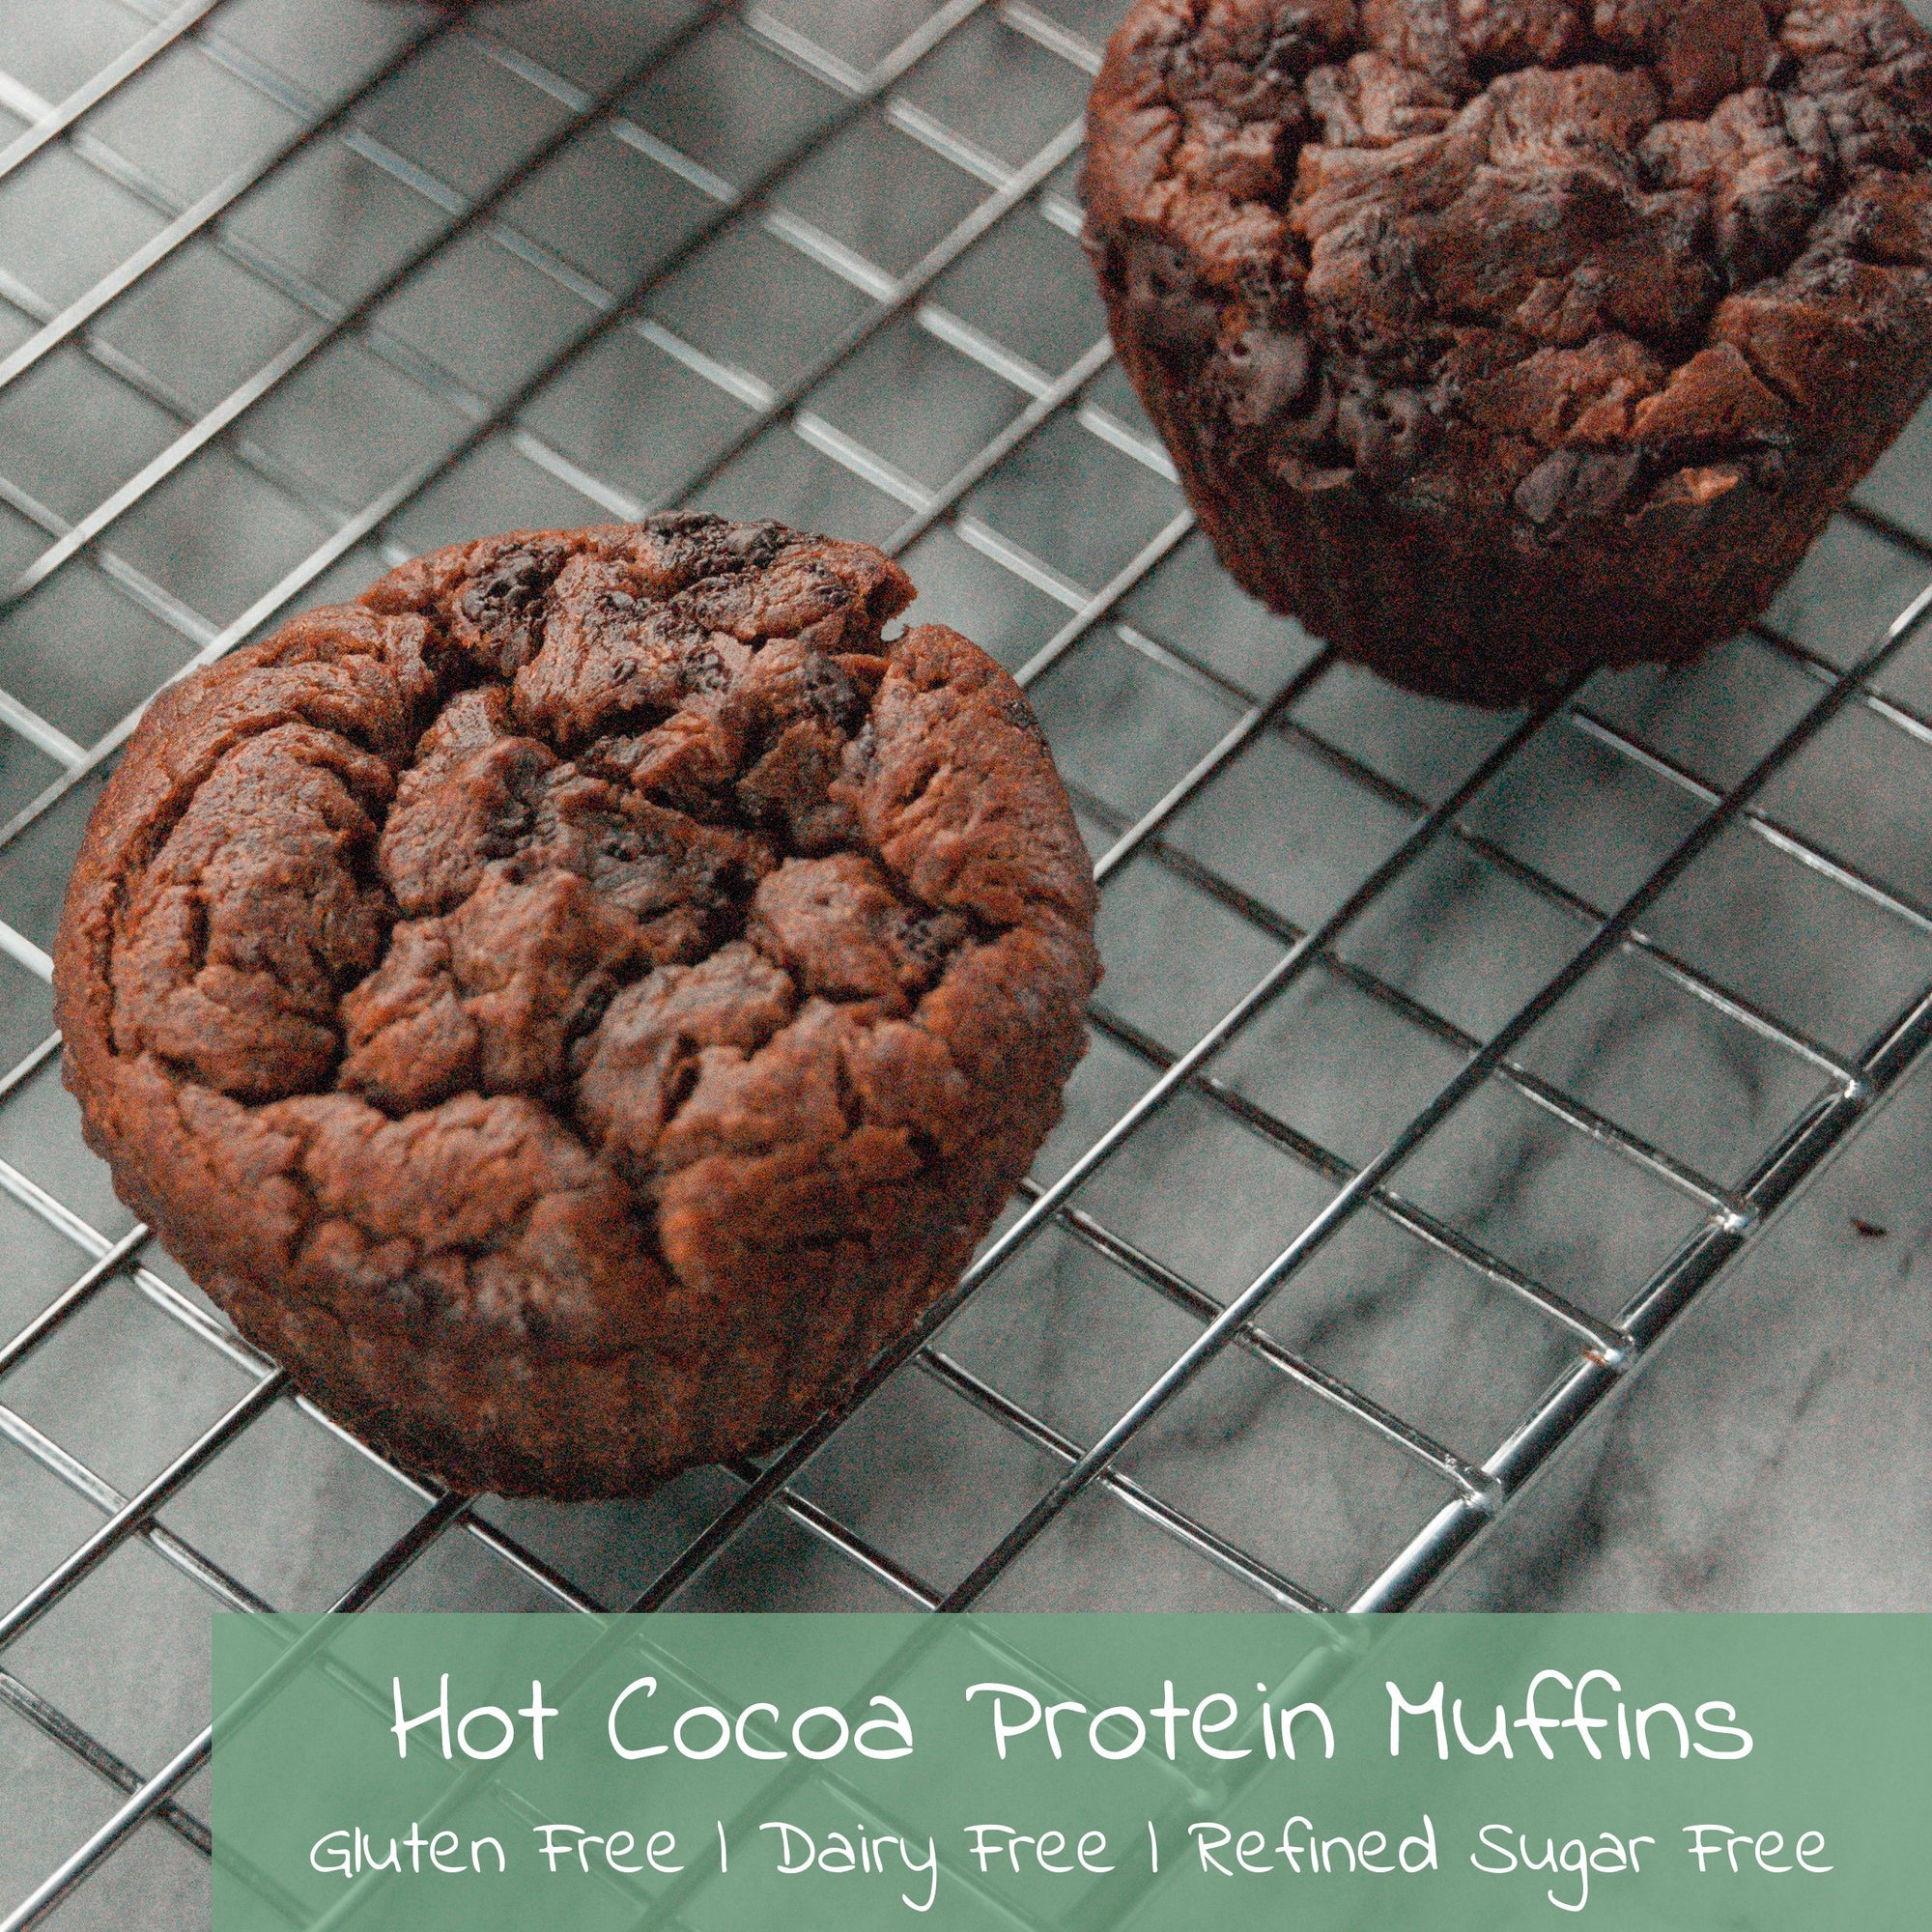 Hot Cocoa Protein Muffins